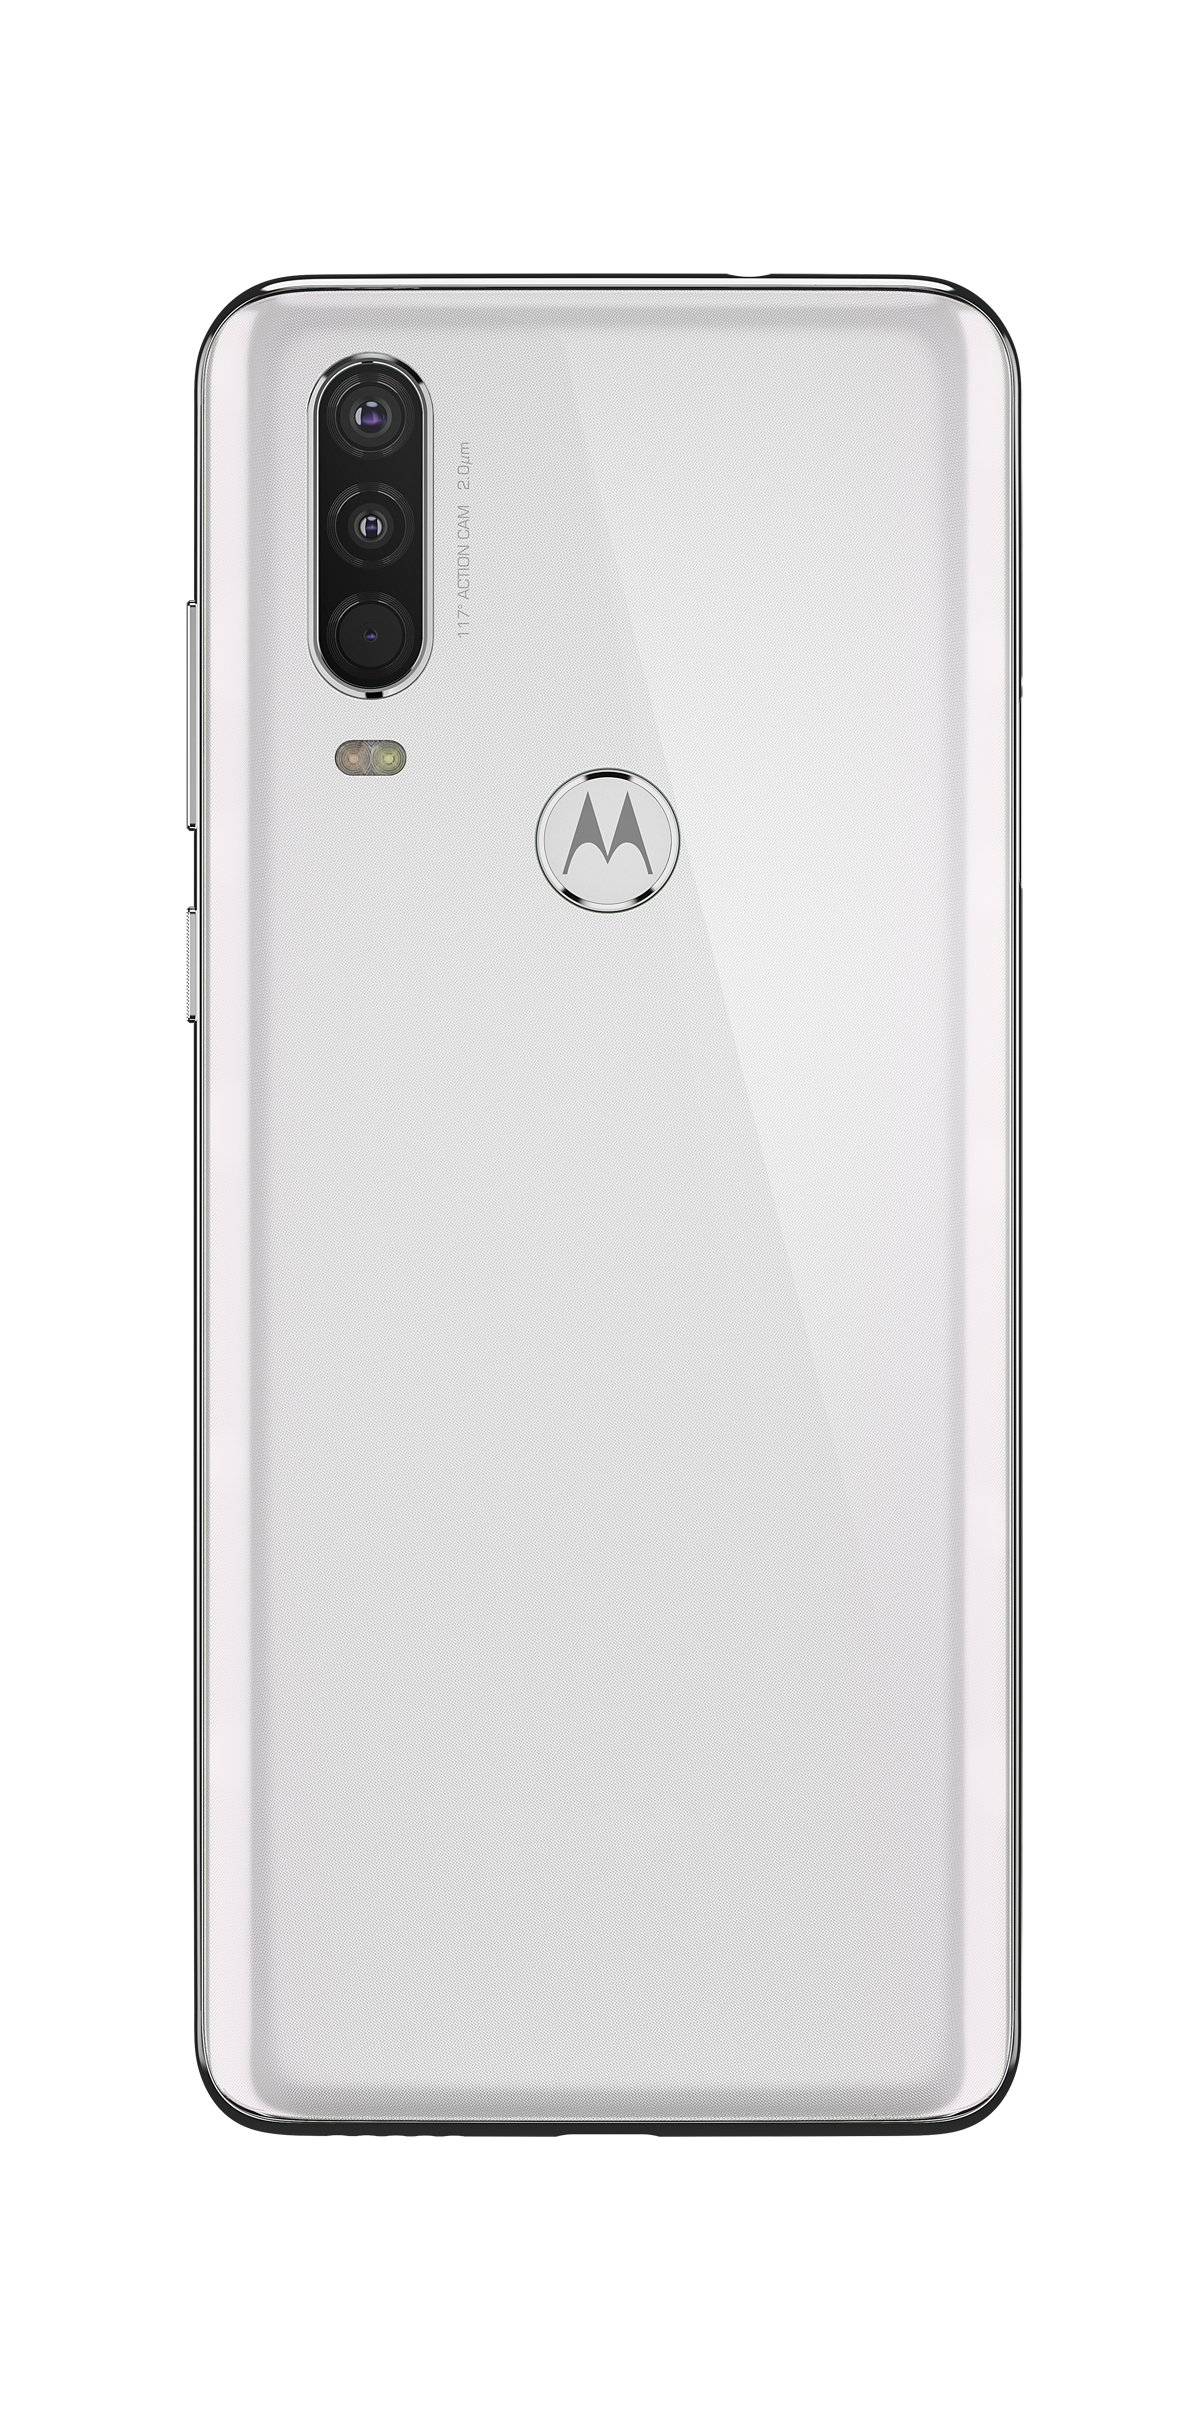 Motorola One Action review